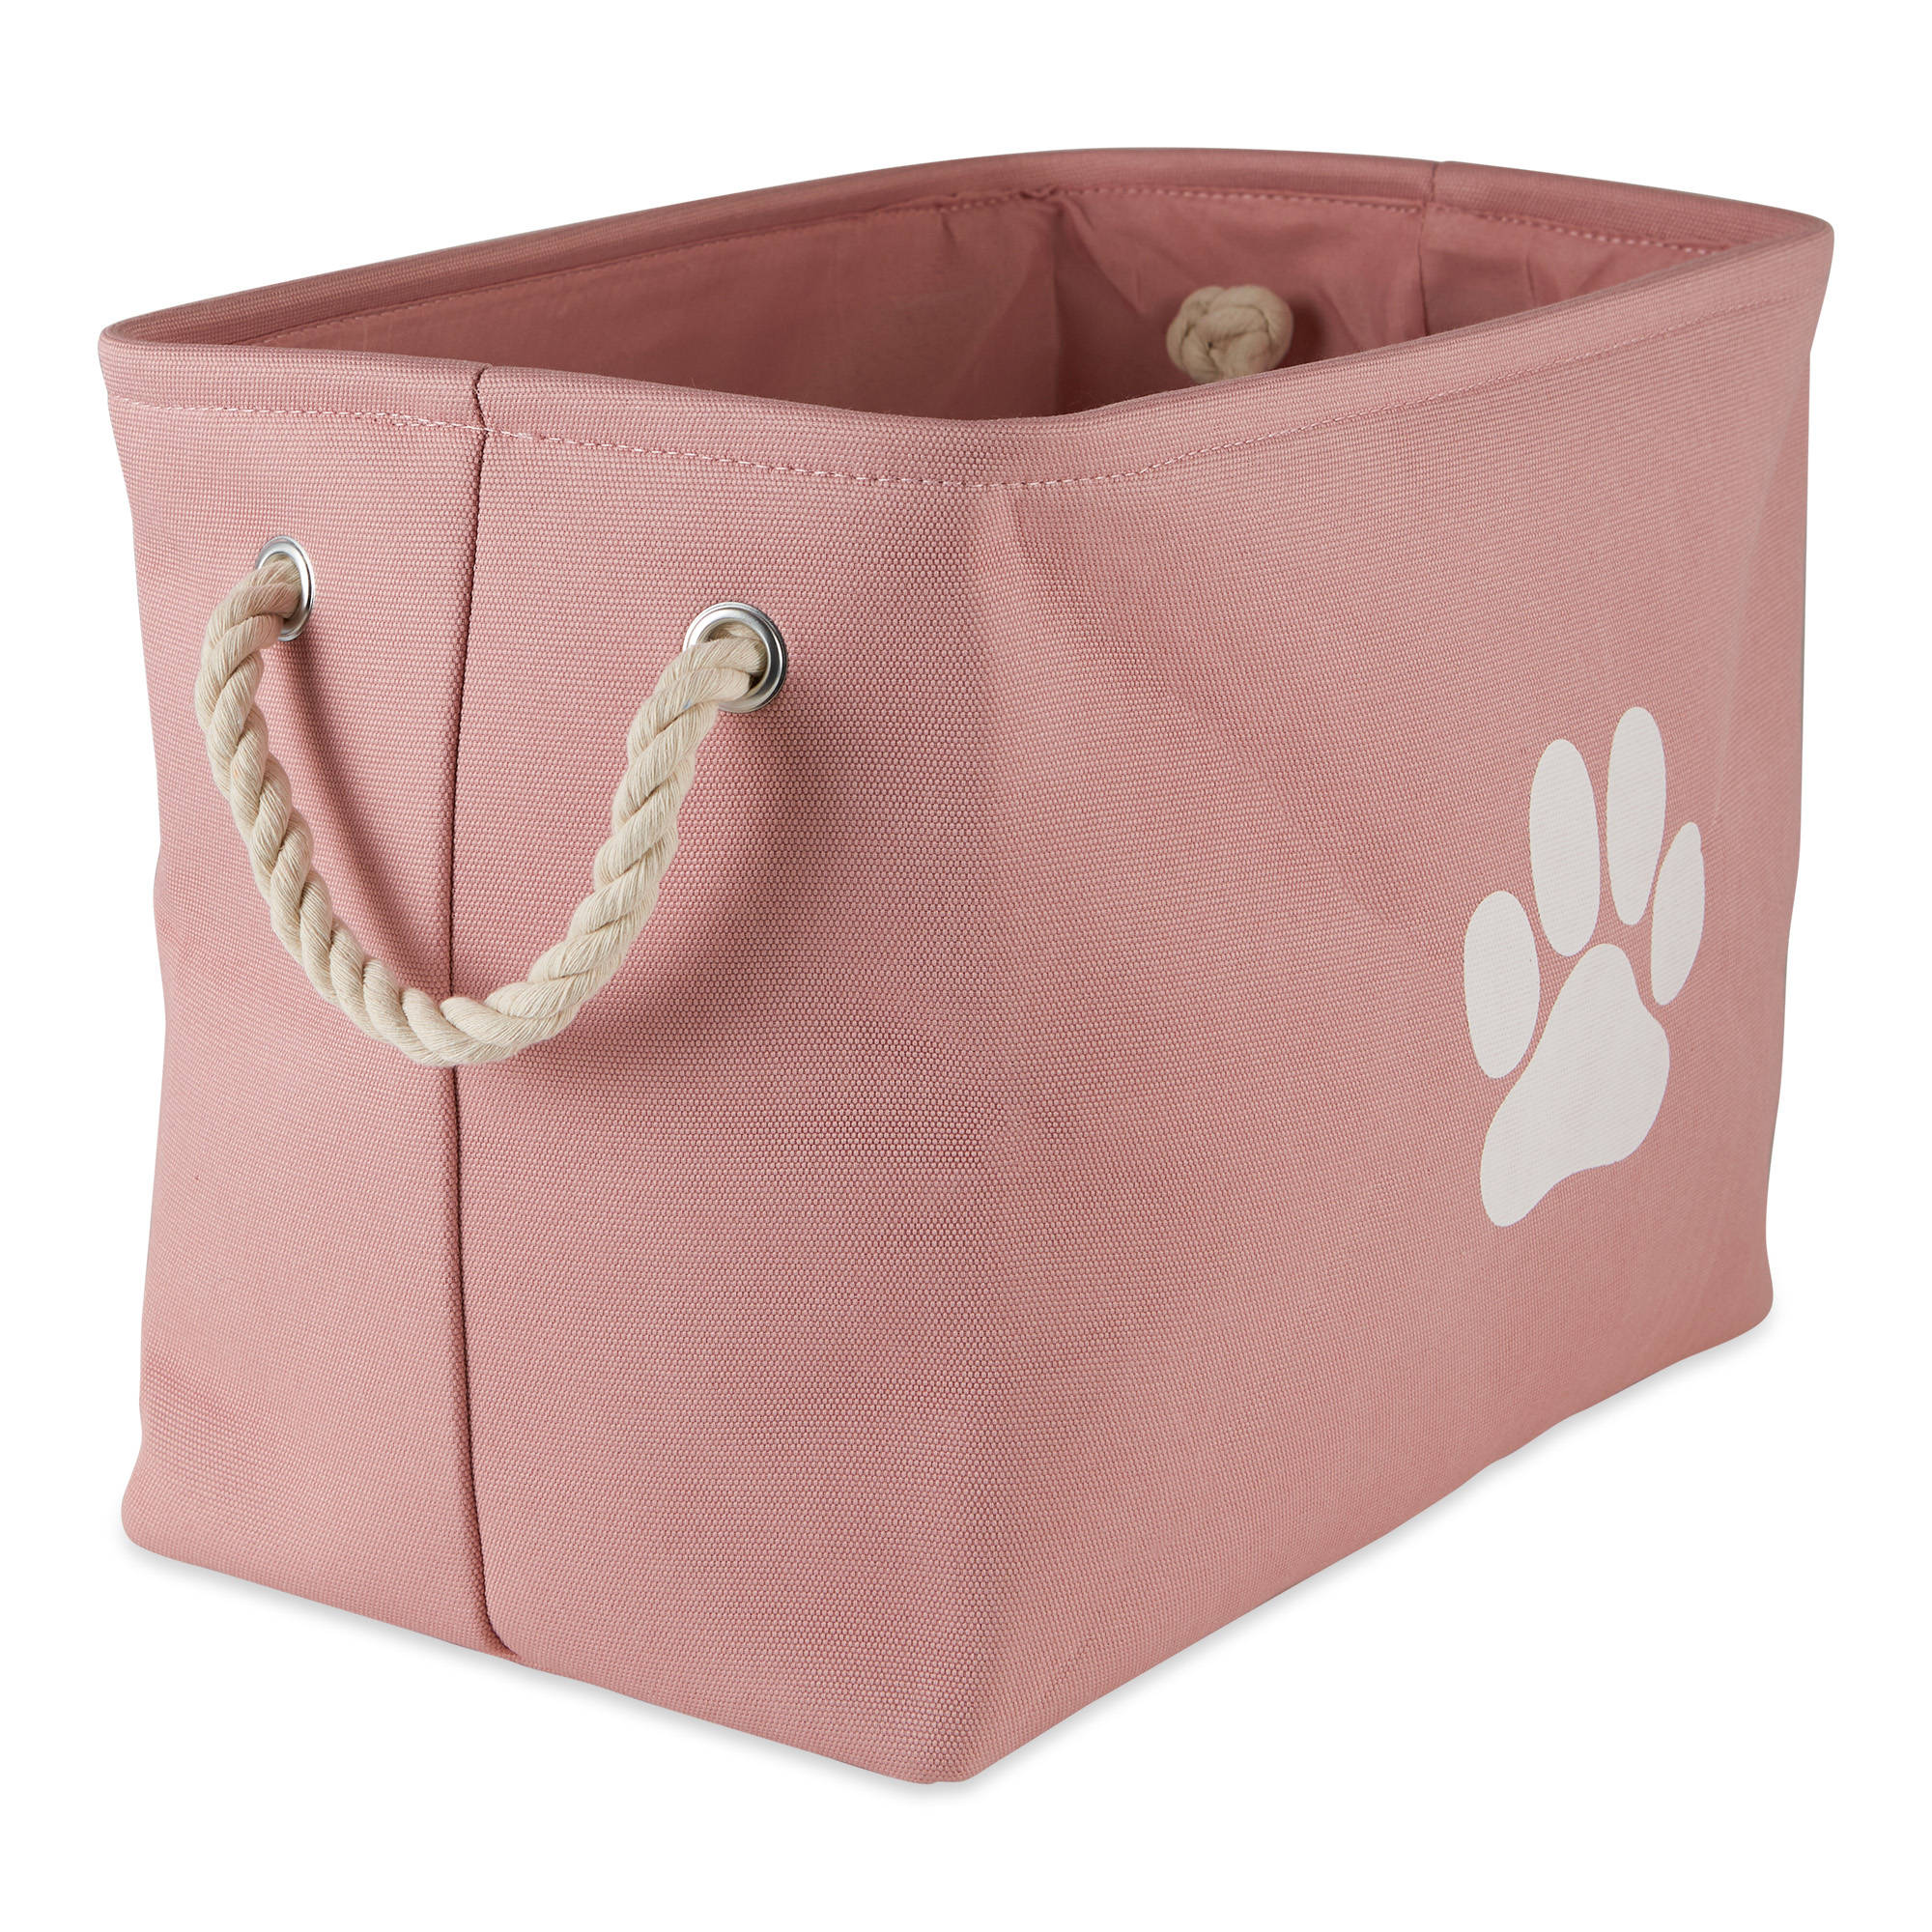 Contemporary Home Living 17.5" Pink and White Rectangular Large Lattice Paw Pet Storage Bin